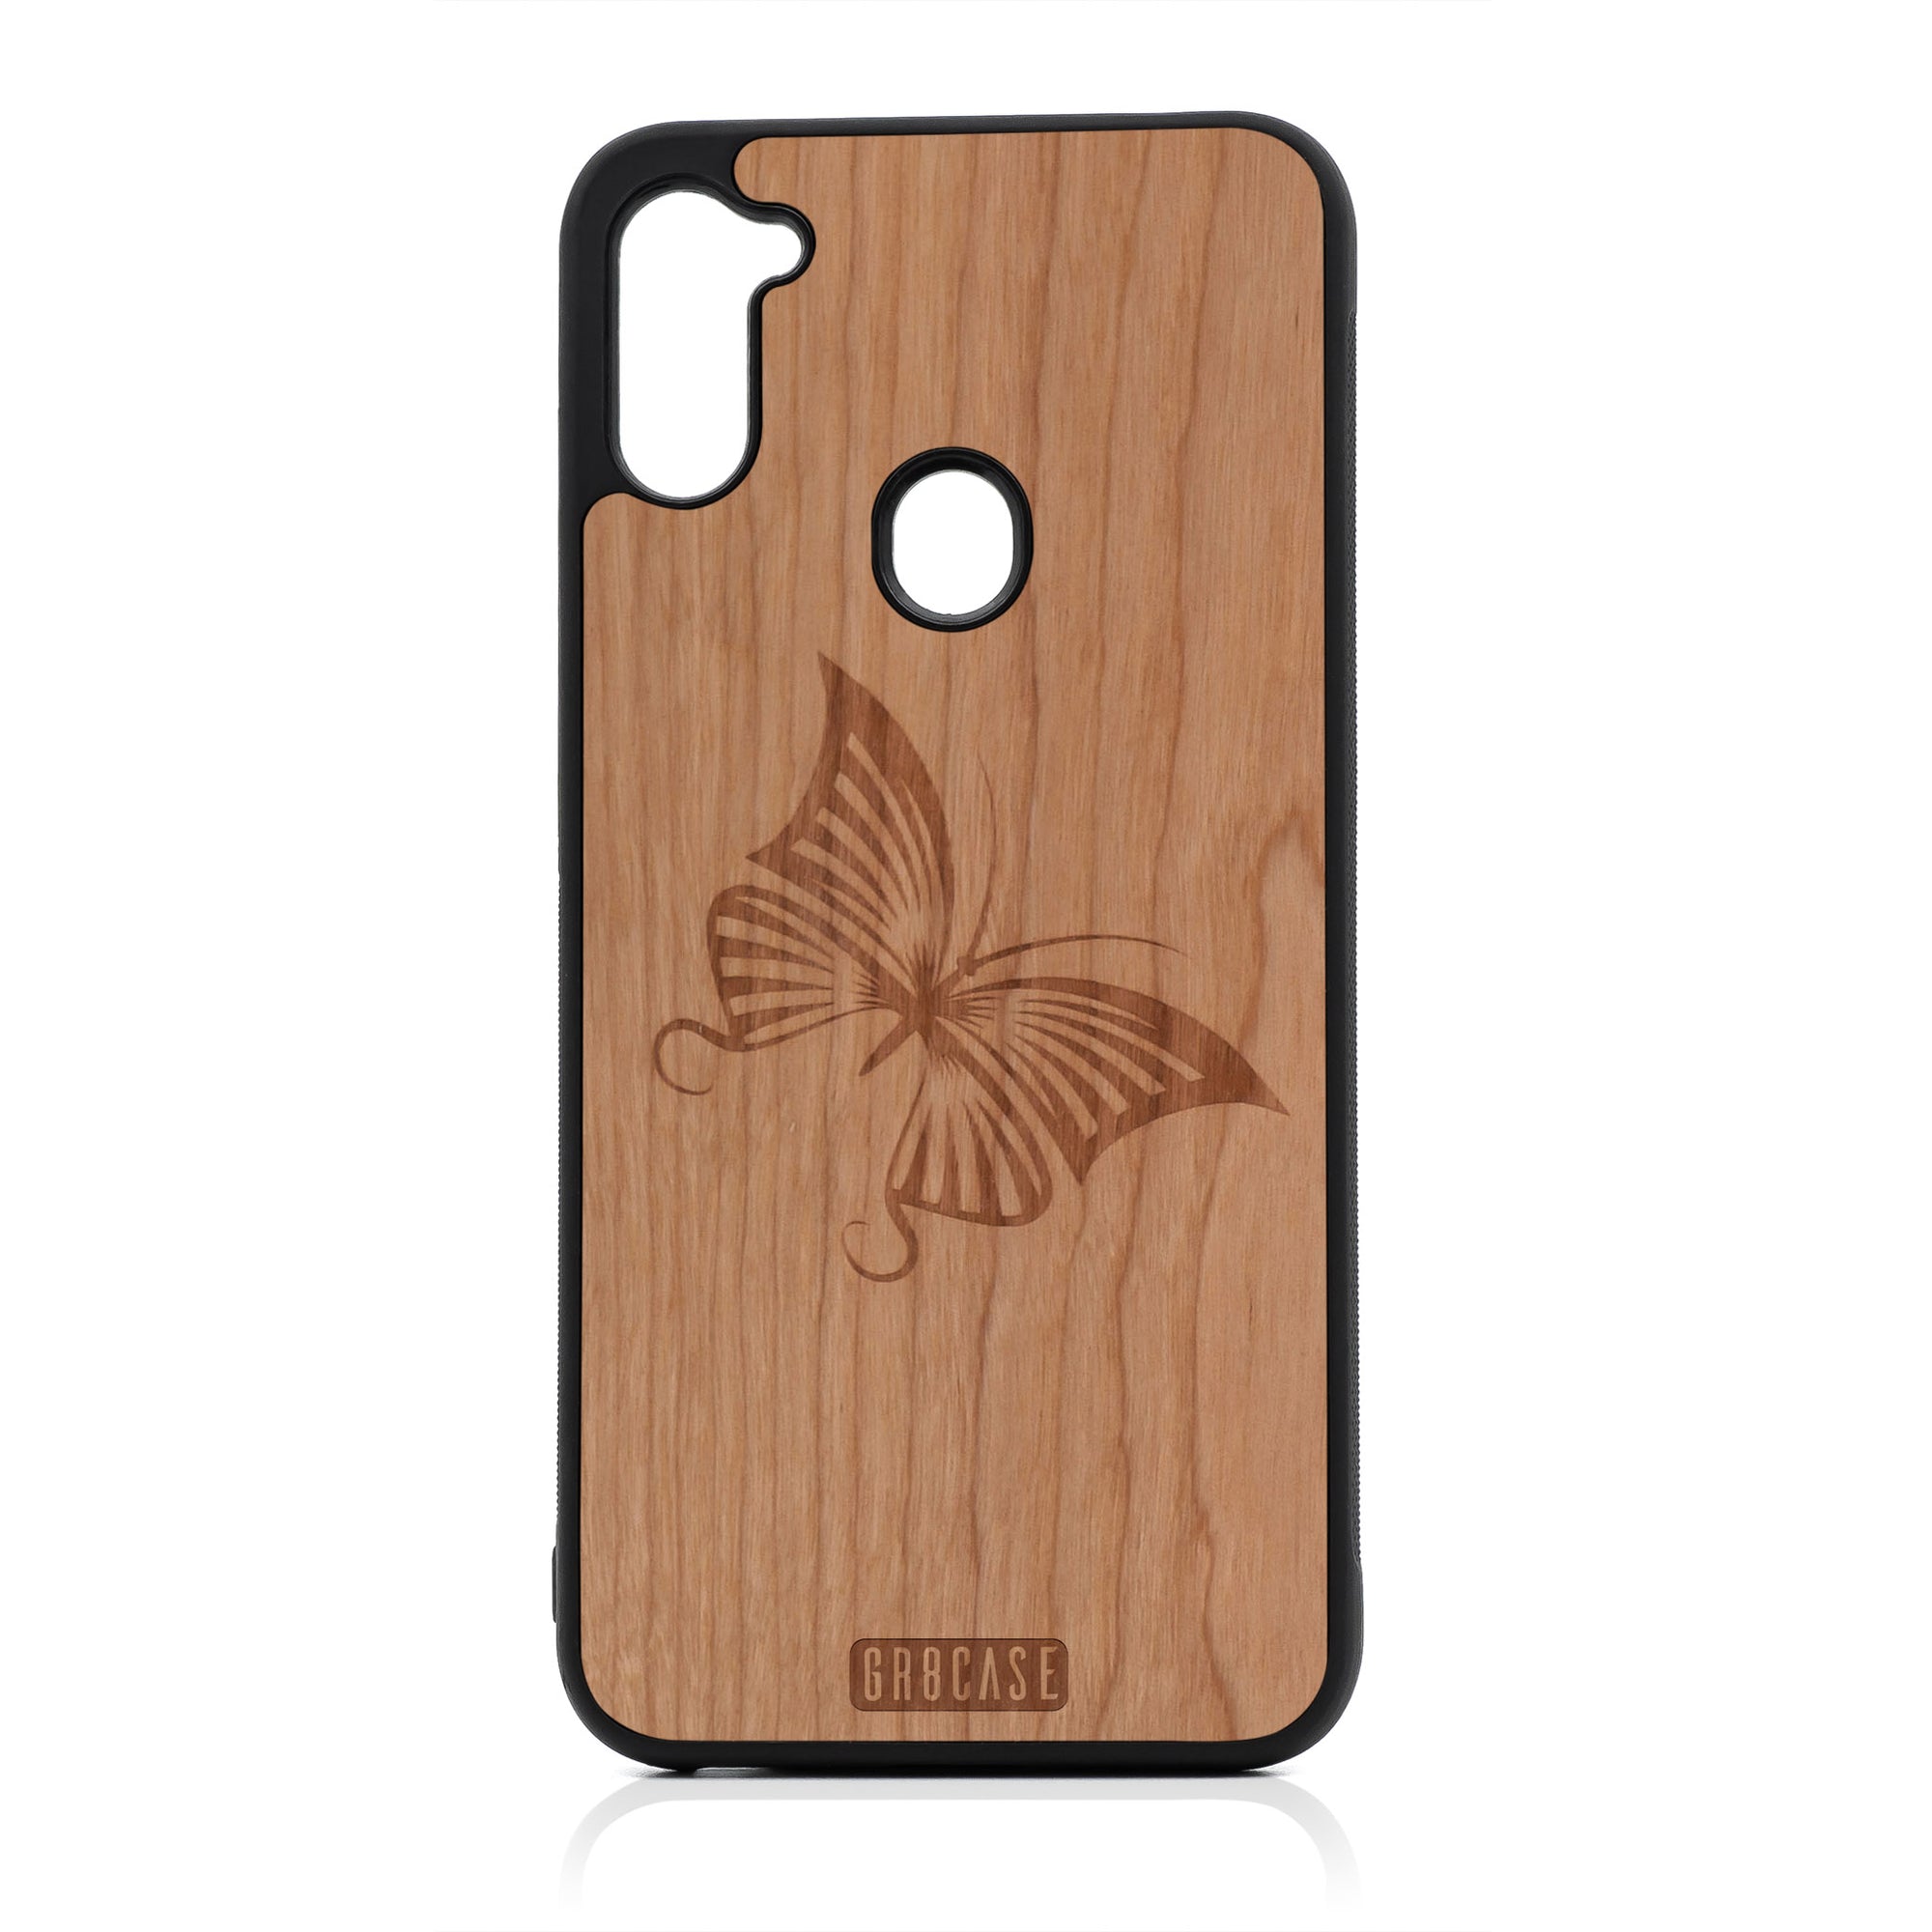 Butterfly Design Wood Case For Samsung Galaxy A11